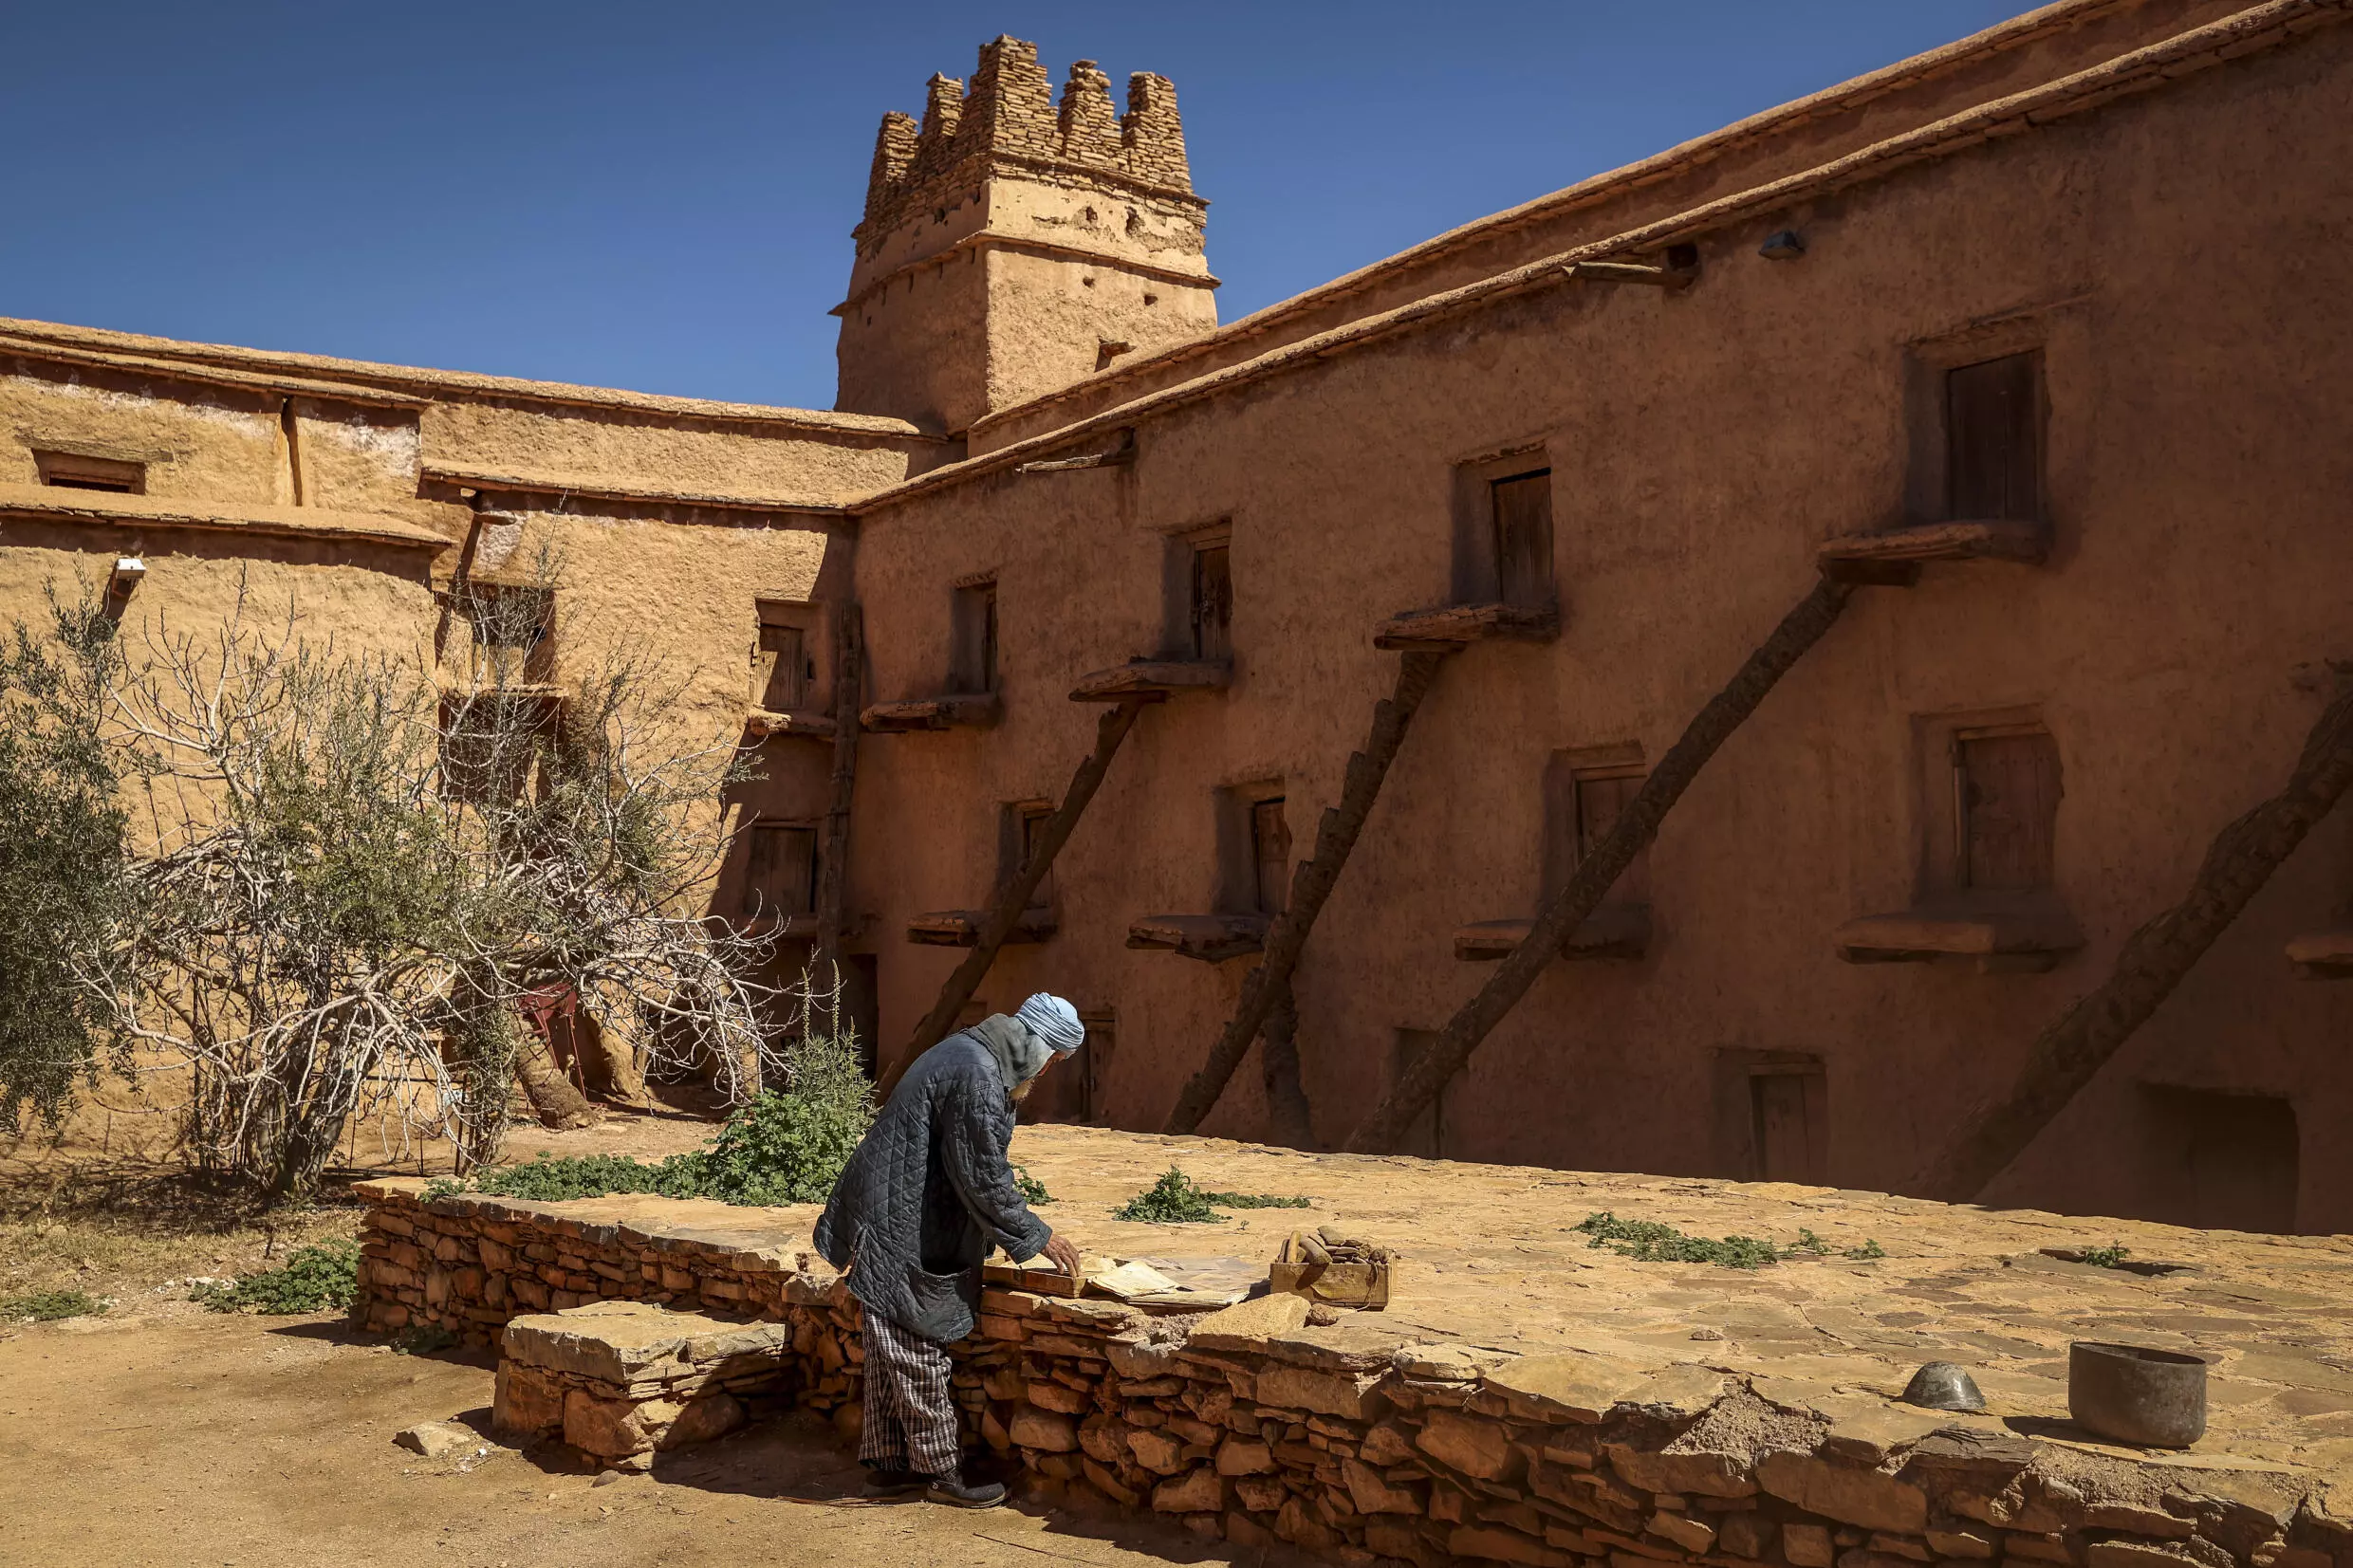 The granary, built using a practice known as rammed earth, sits in the village centre, protected by a fortified wall with a stone watchtower. Photo: AFP